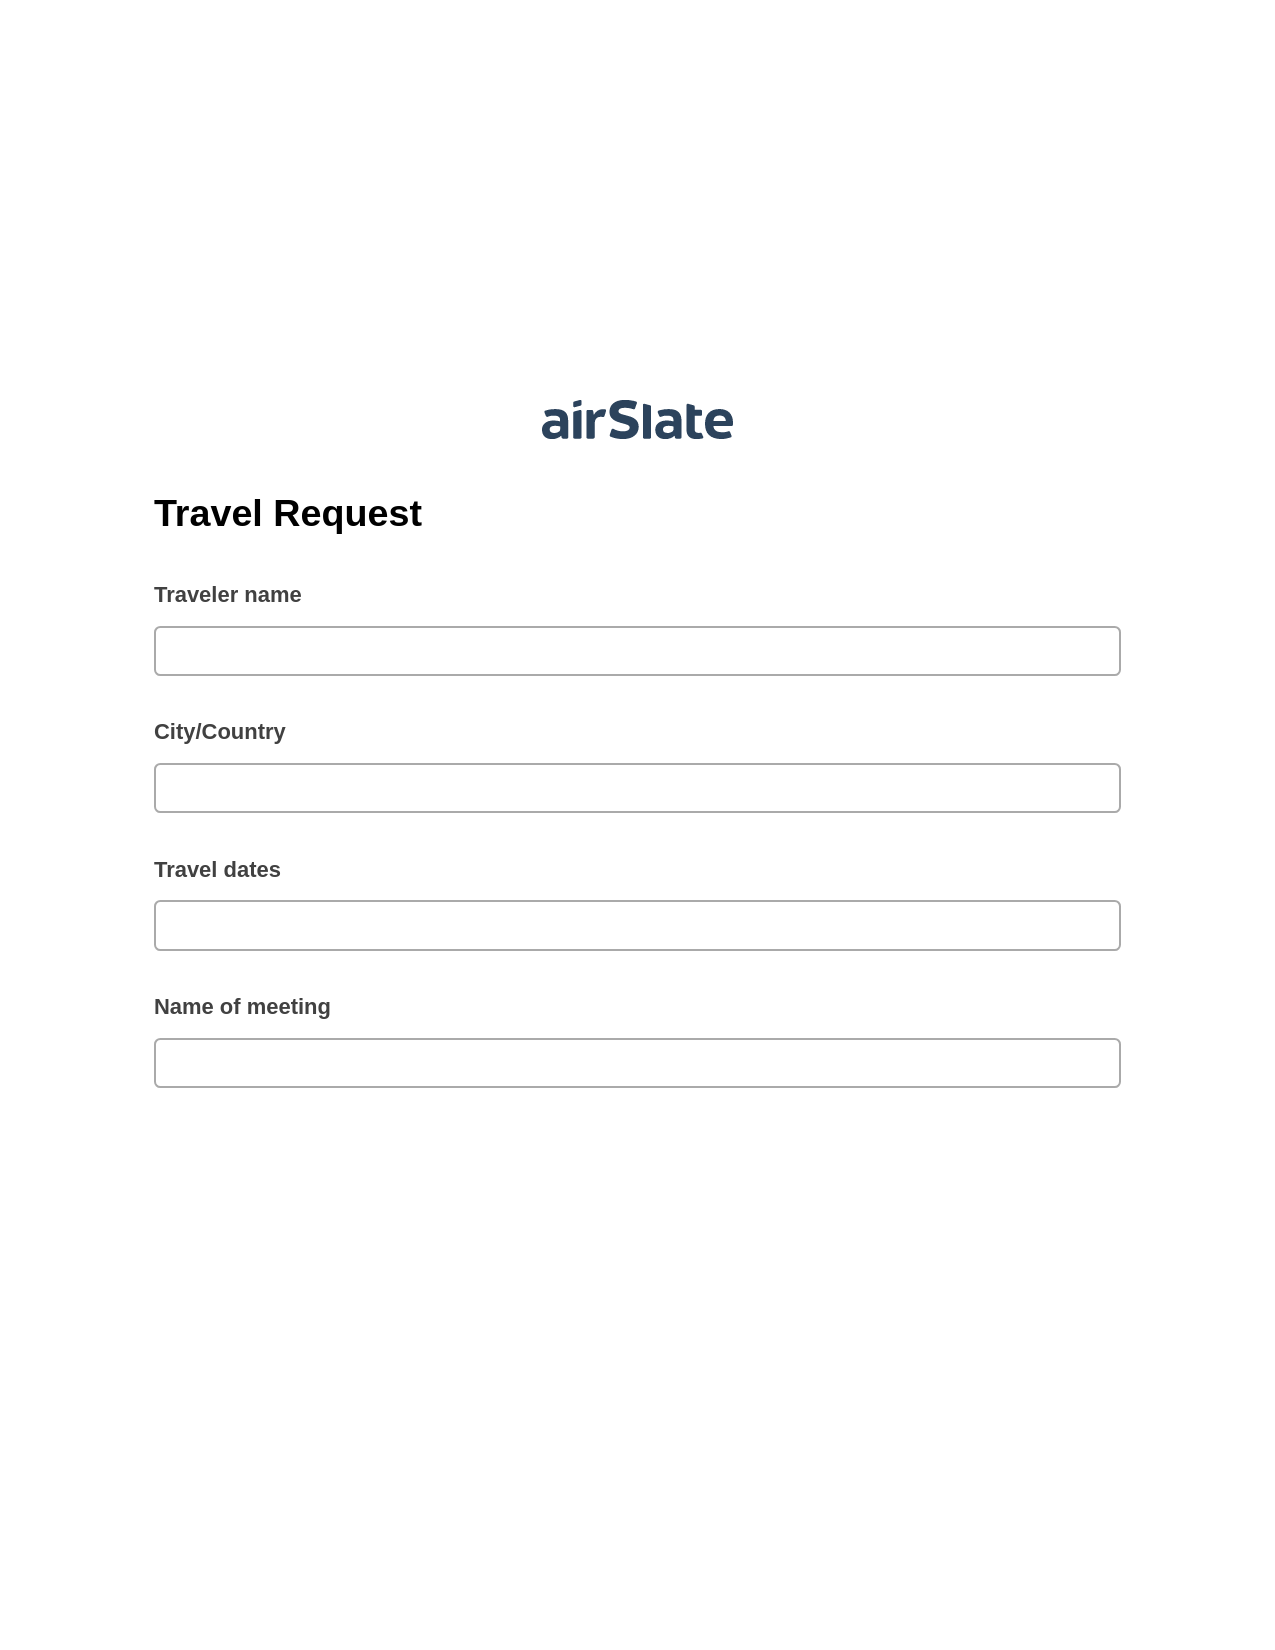 Travel Request Pre-fill from another Slate Bot, Pre-fill with Custom Data Bot, OneDrive Bot